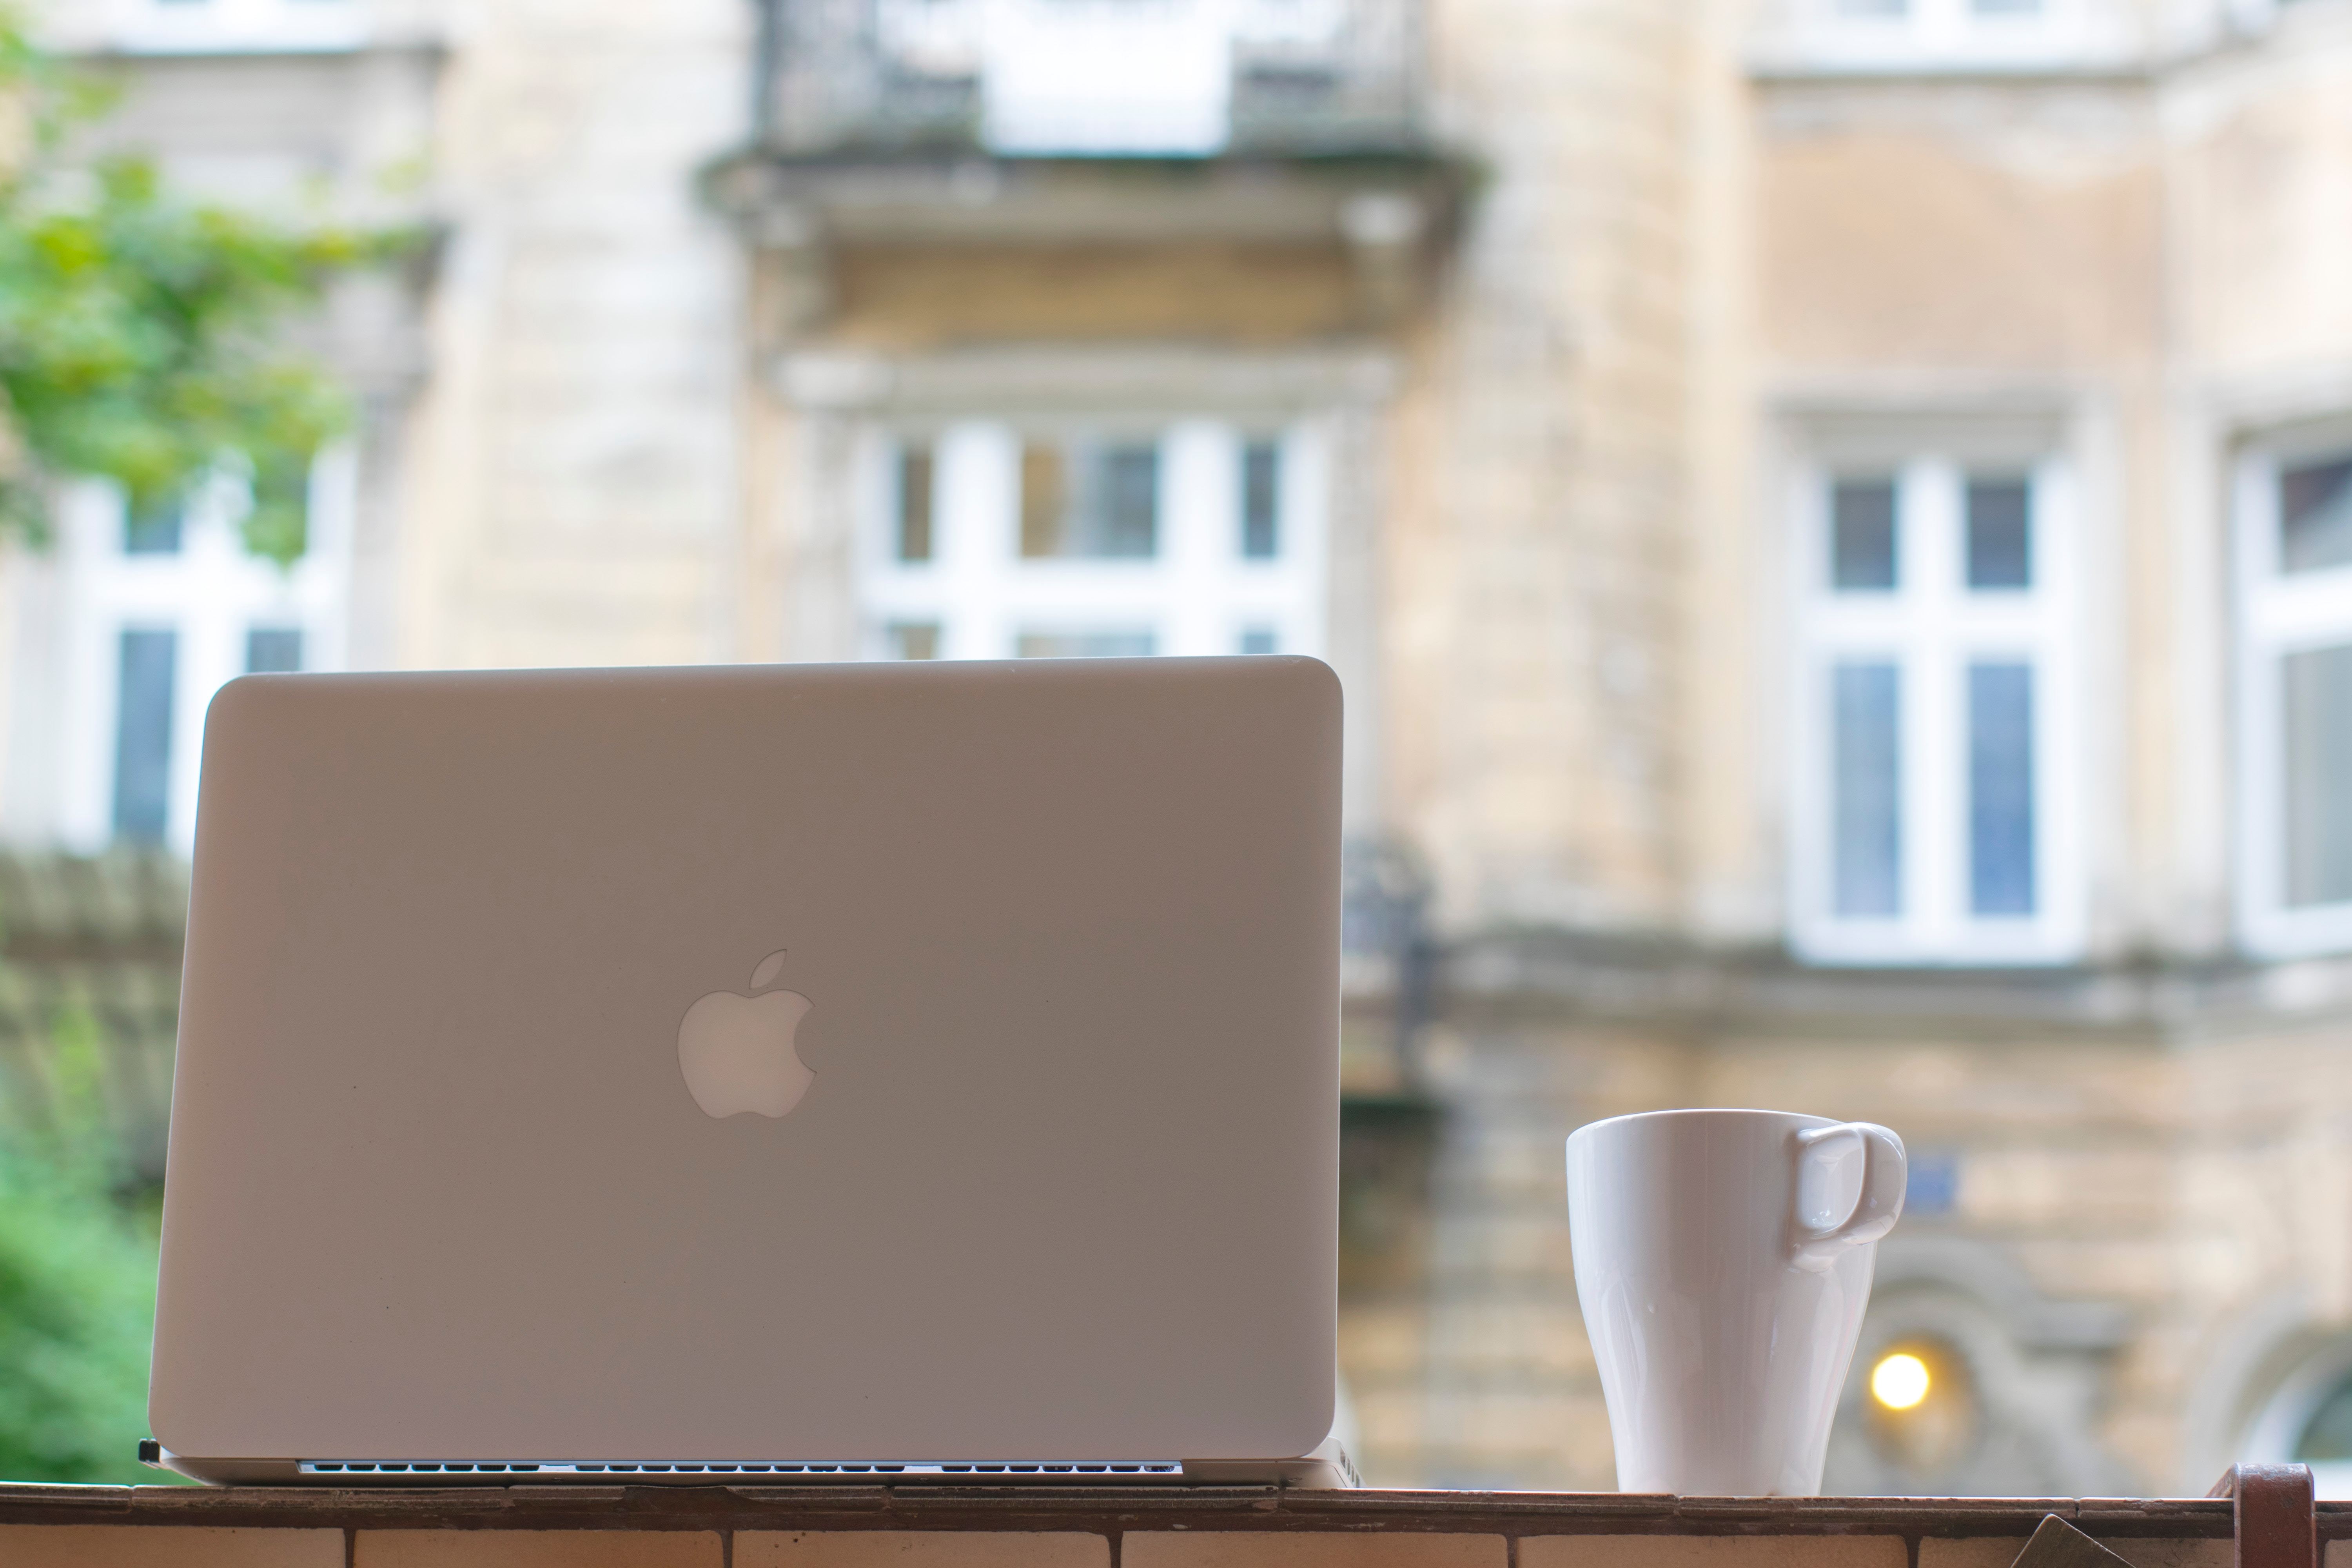 7 Tips for Maximizing Productivity while Working from Home - Choosing the right location and setting up a dedicated workspace